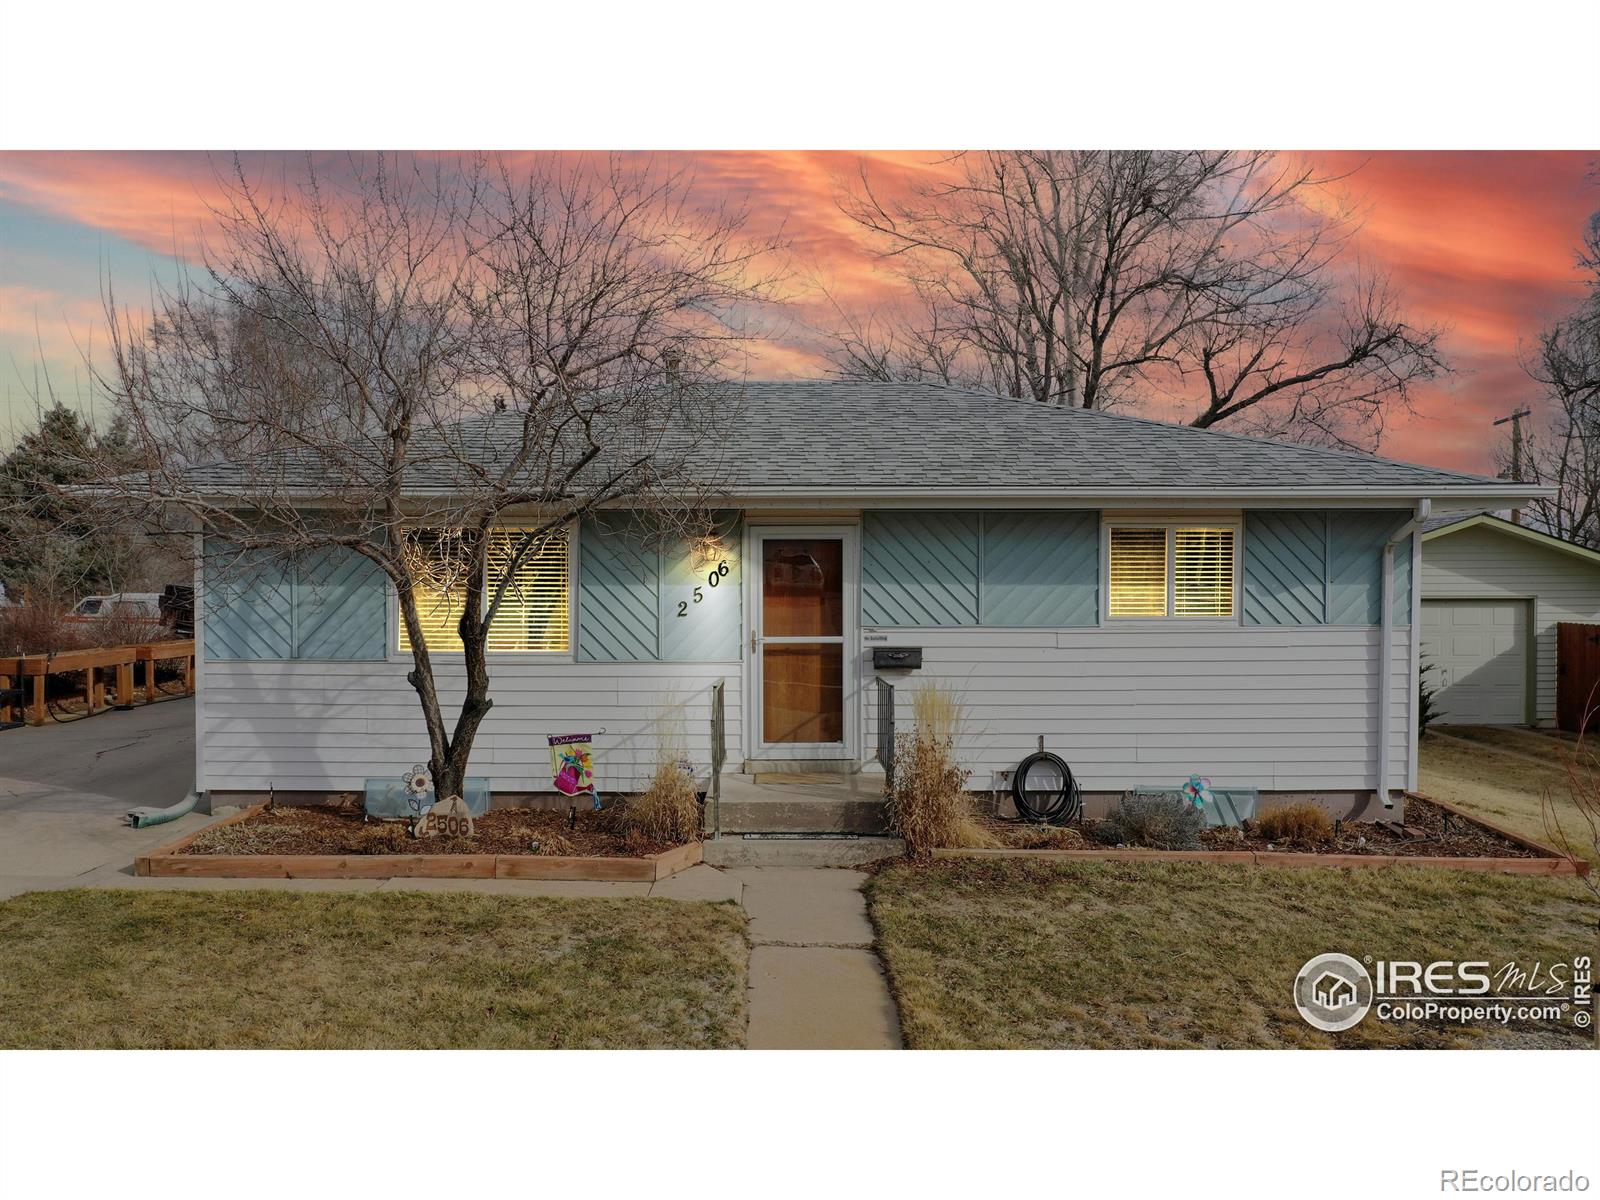 2506  17th Avenue, greeley MLS: 4567891003176 Beds: 4 Baths: 2 Price: $400,000